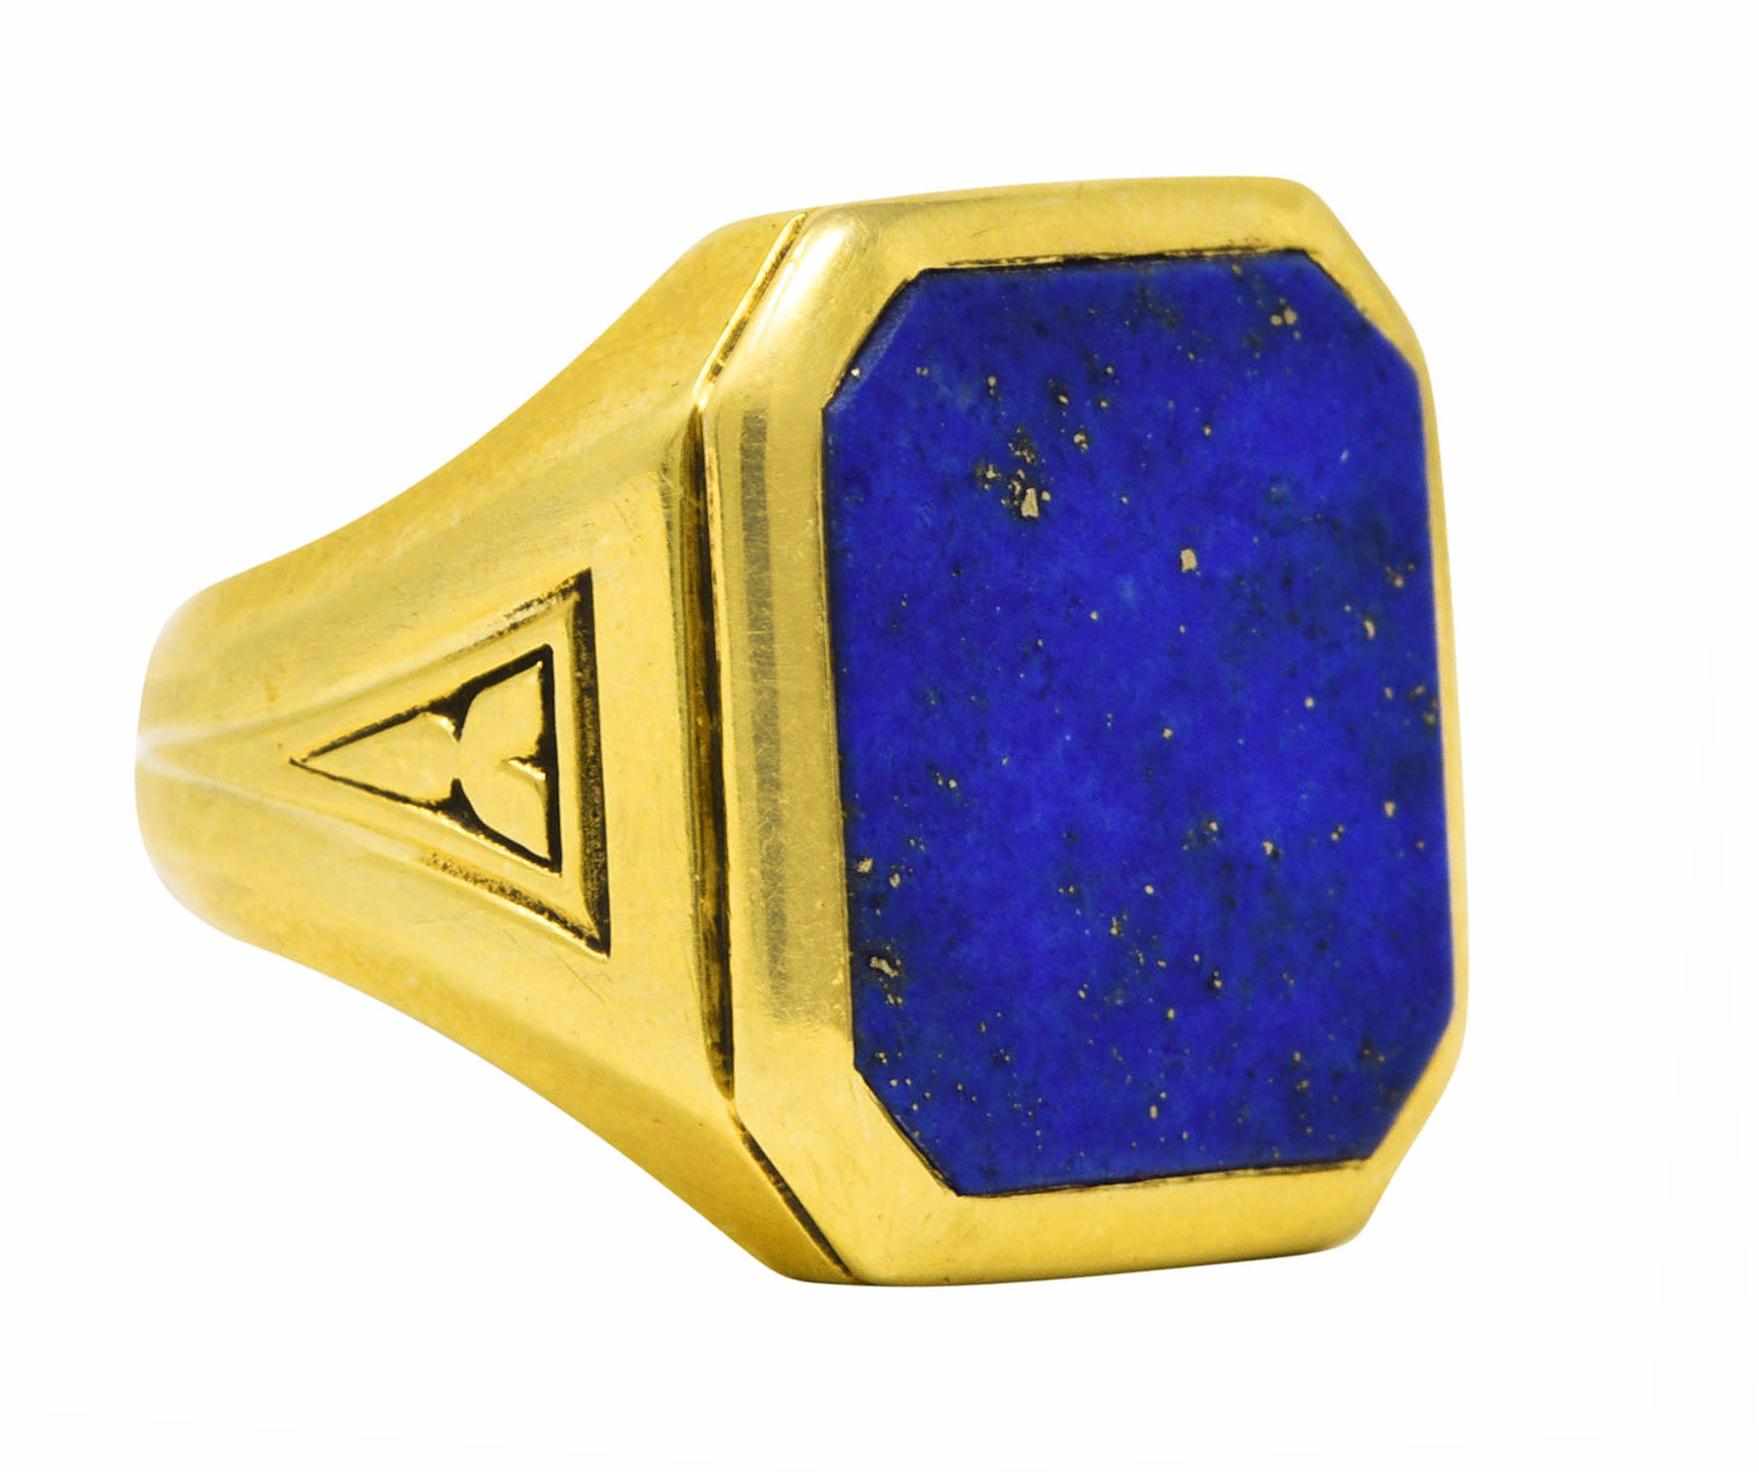 Ring centers an octagonal tablet of lapis lazuli measuring 13.5 x 15.5 mm

Opaque medium ultramarine blue with mottling and subtle pyrite flecking

Flanked by faceted shoulders with stylized trefoil engraving

Inscribed with 'E.M.A to R.B FC' inside